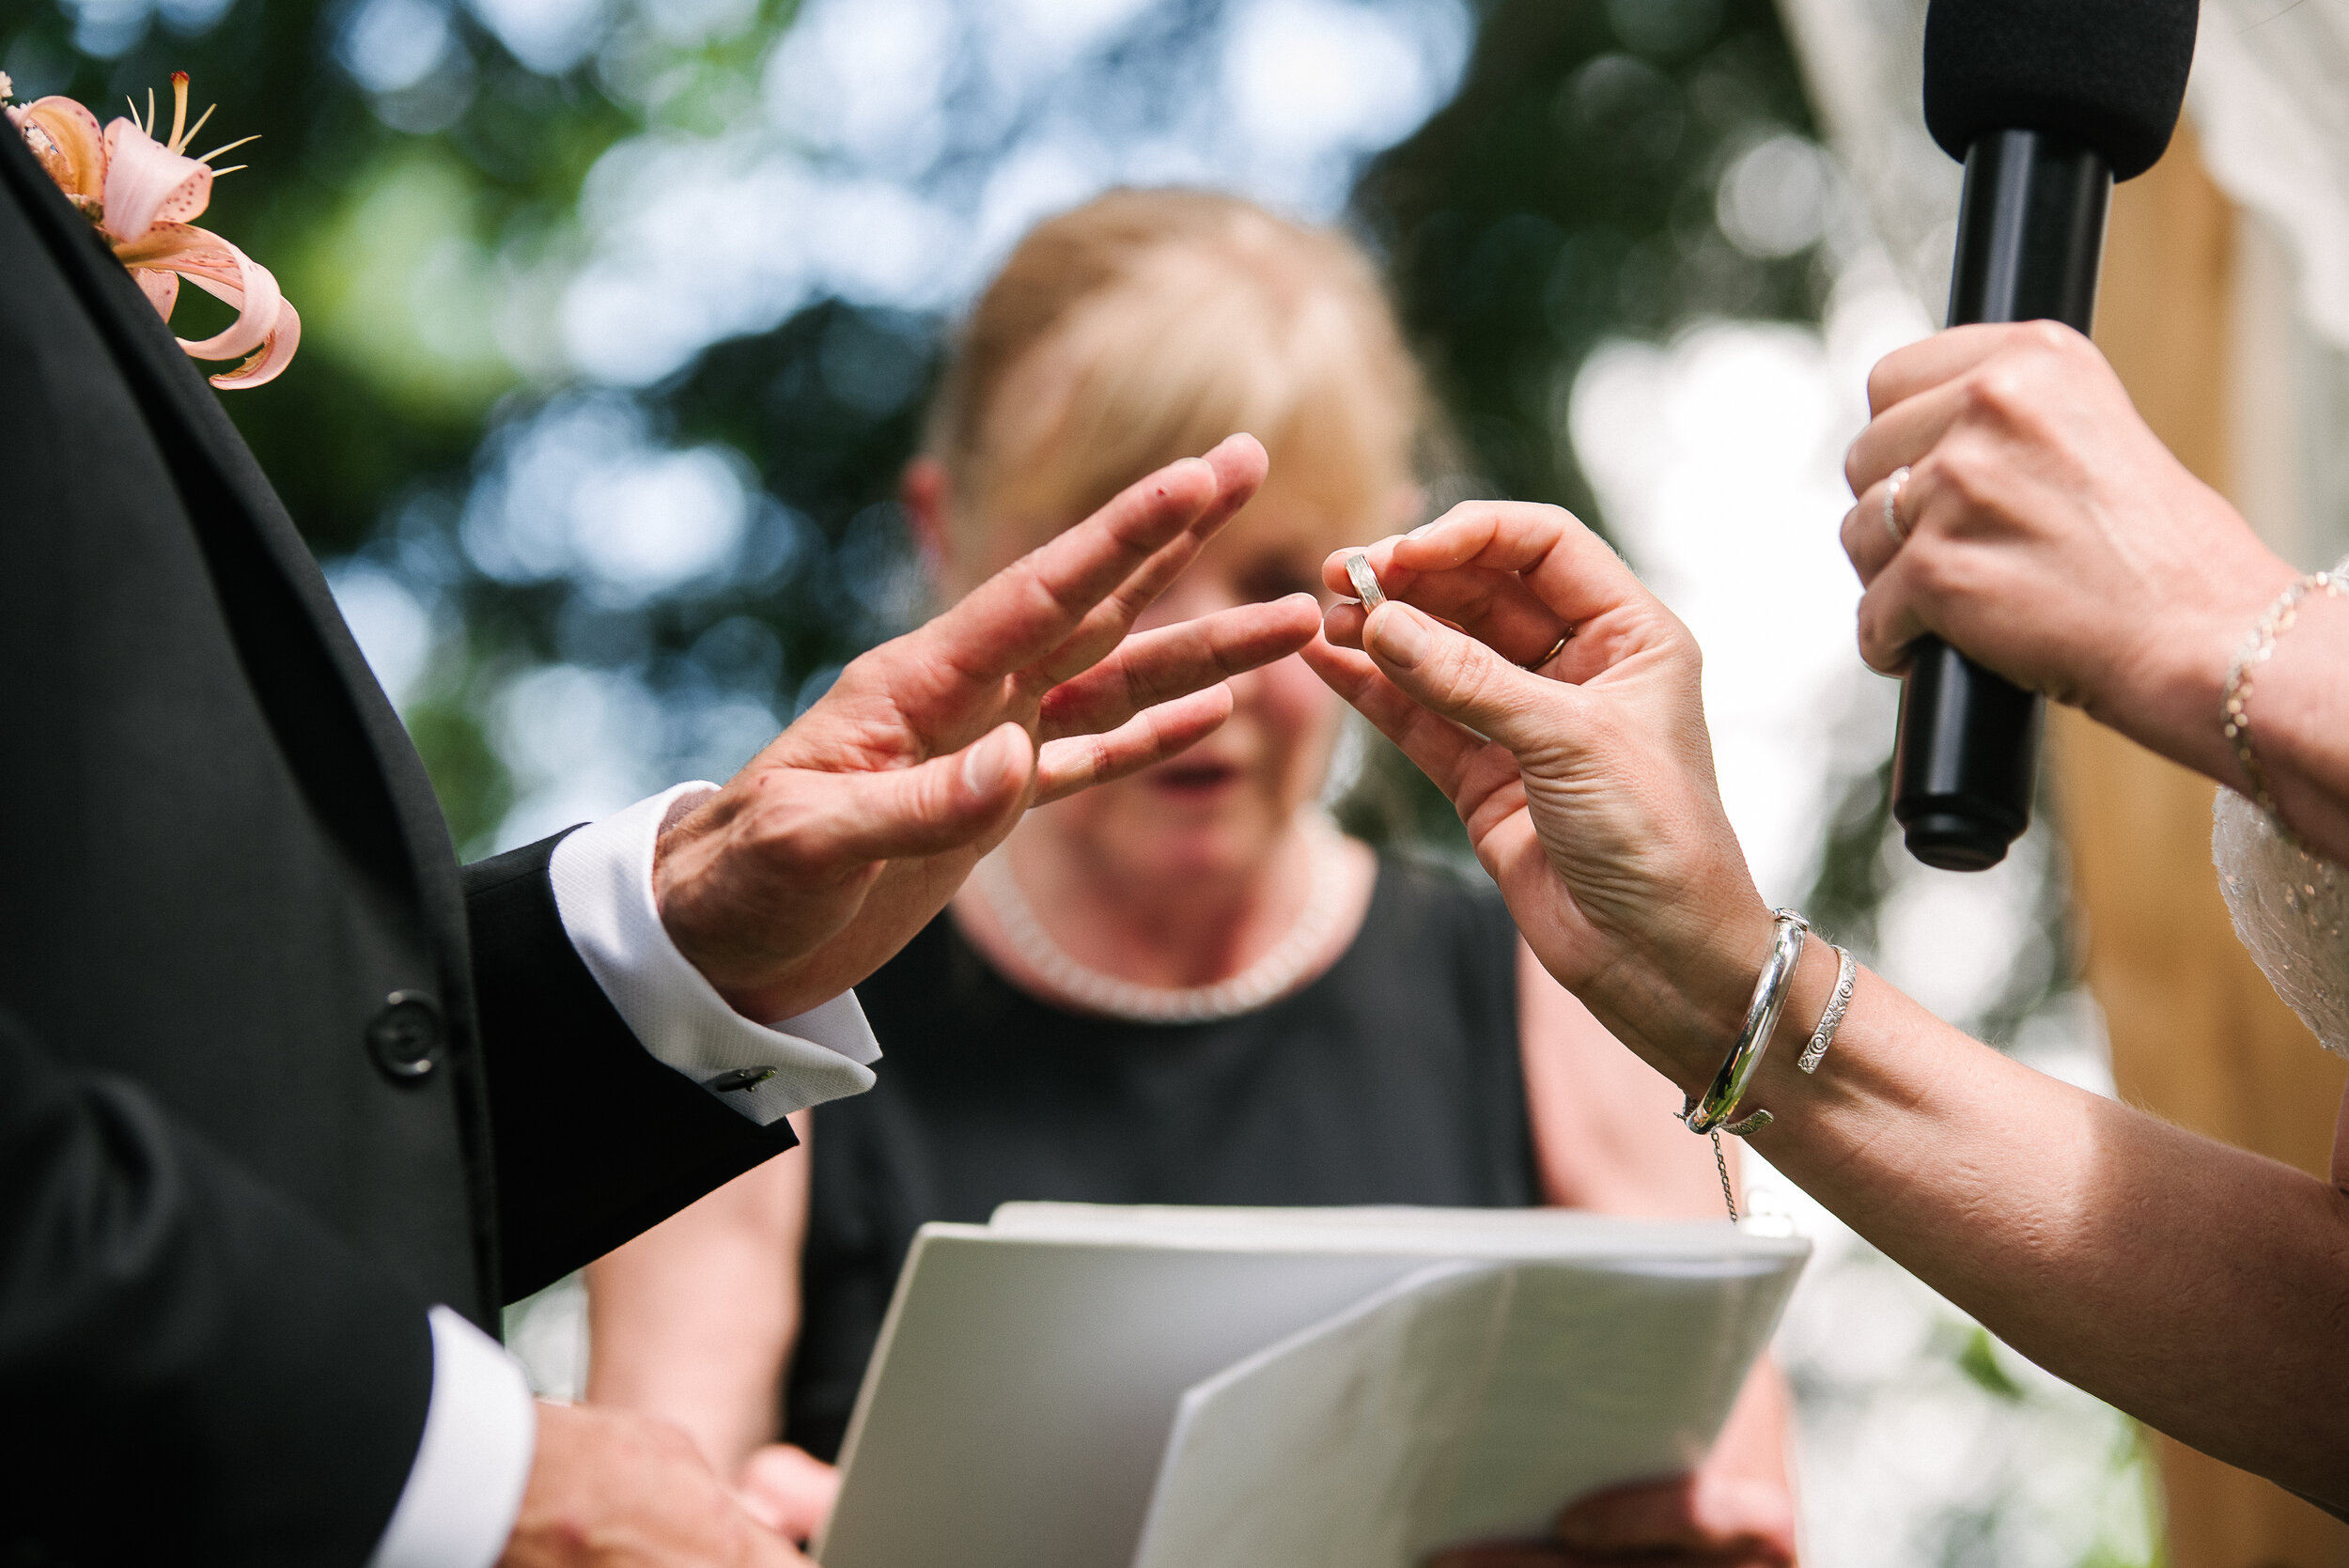 Bride putting ring on groom's finger during ceremony at Verona, Ontario wedding